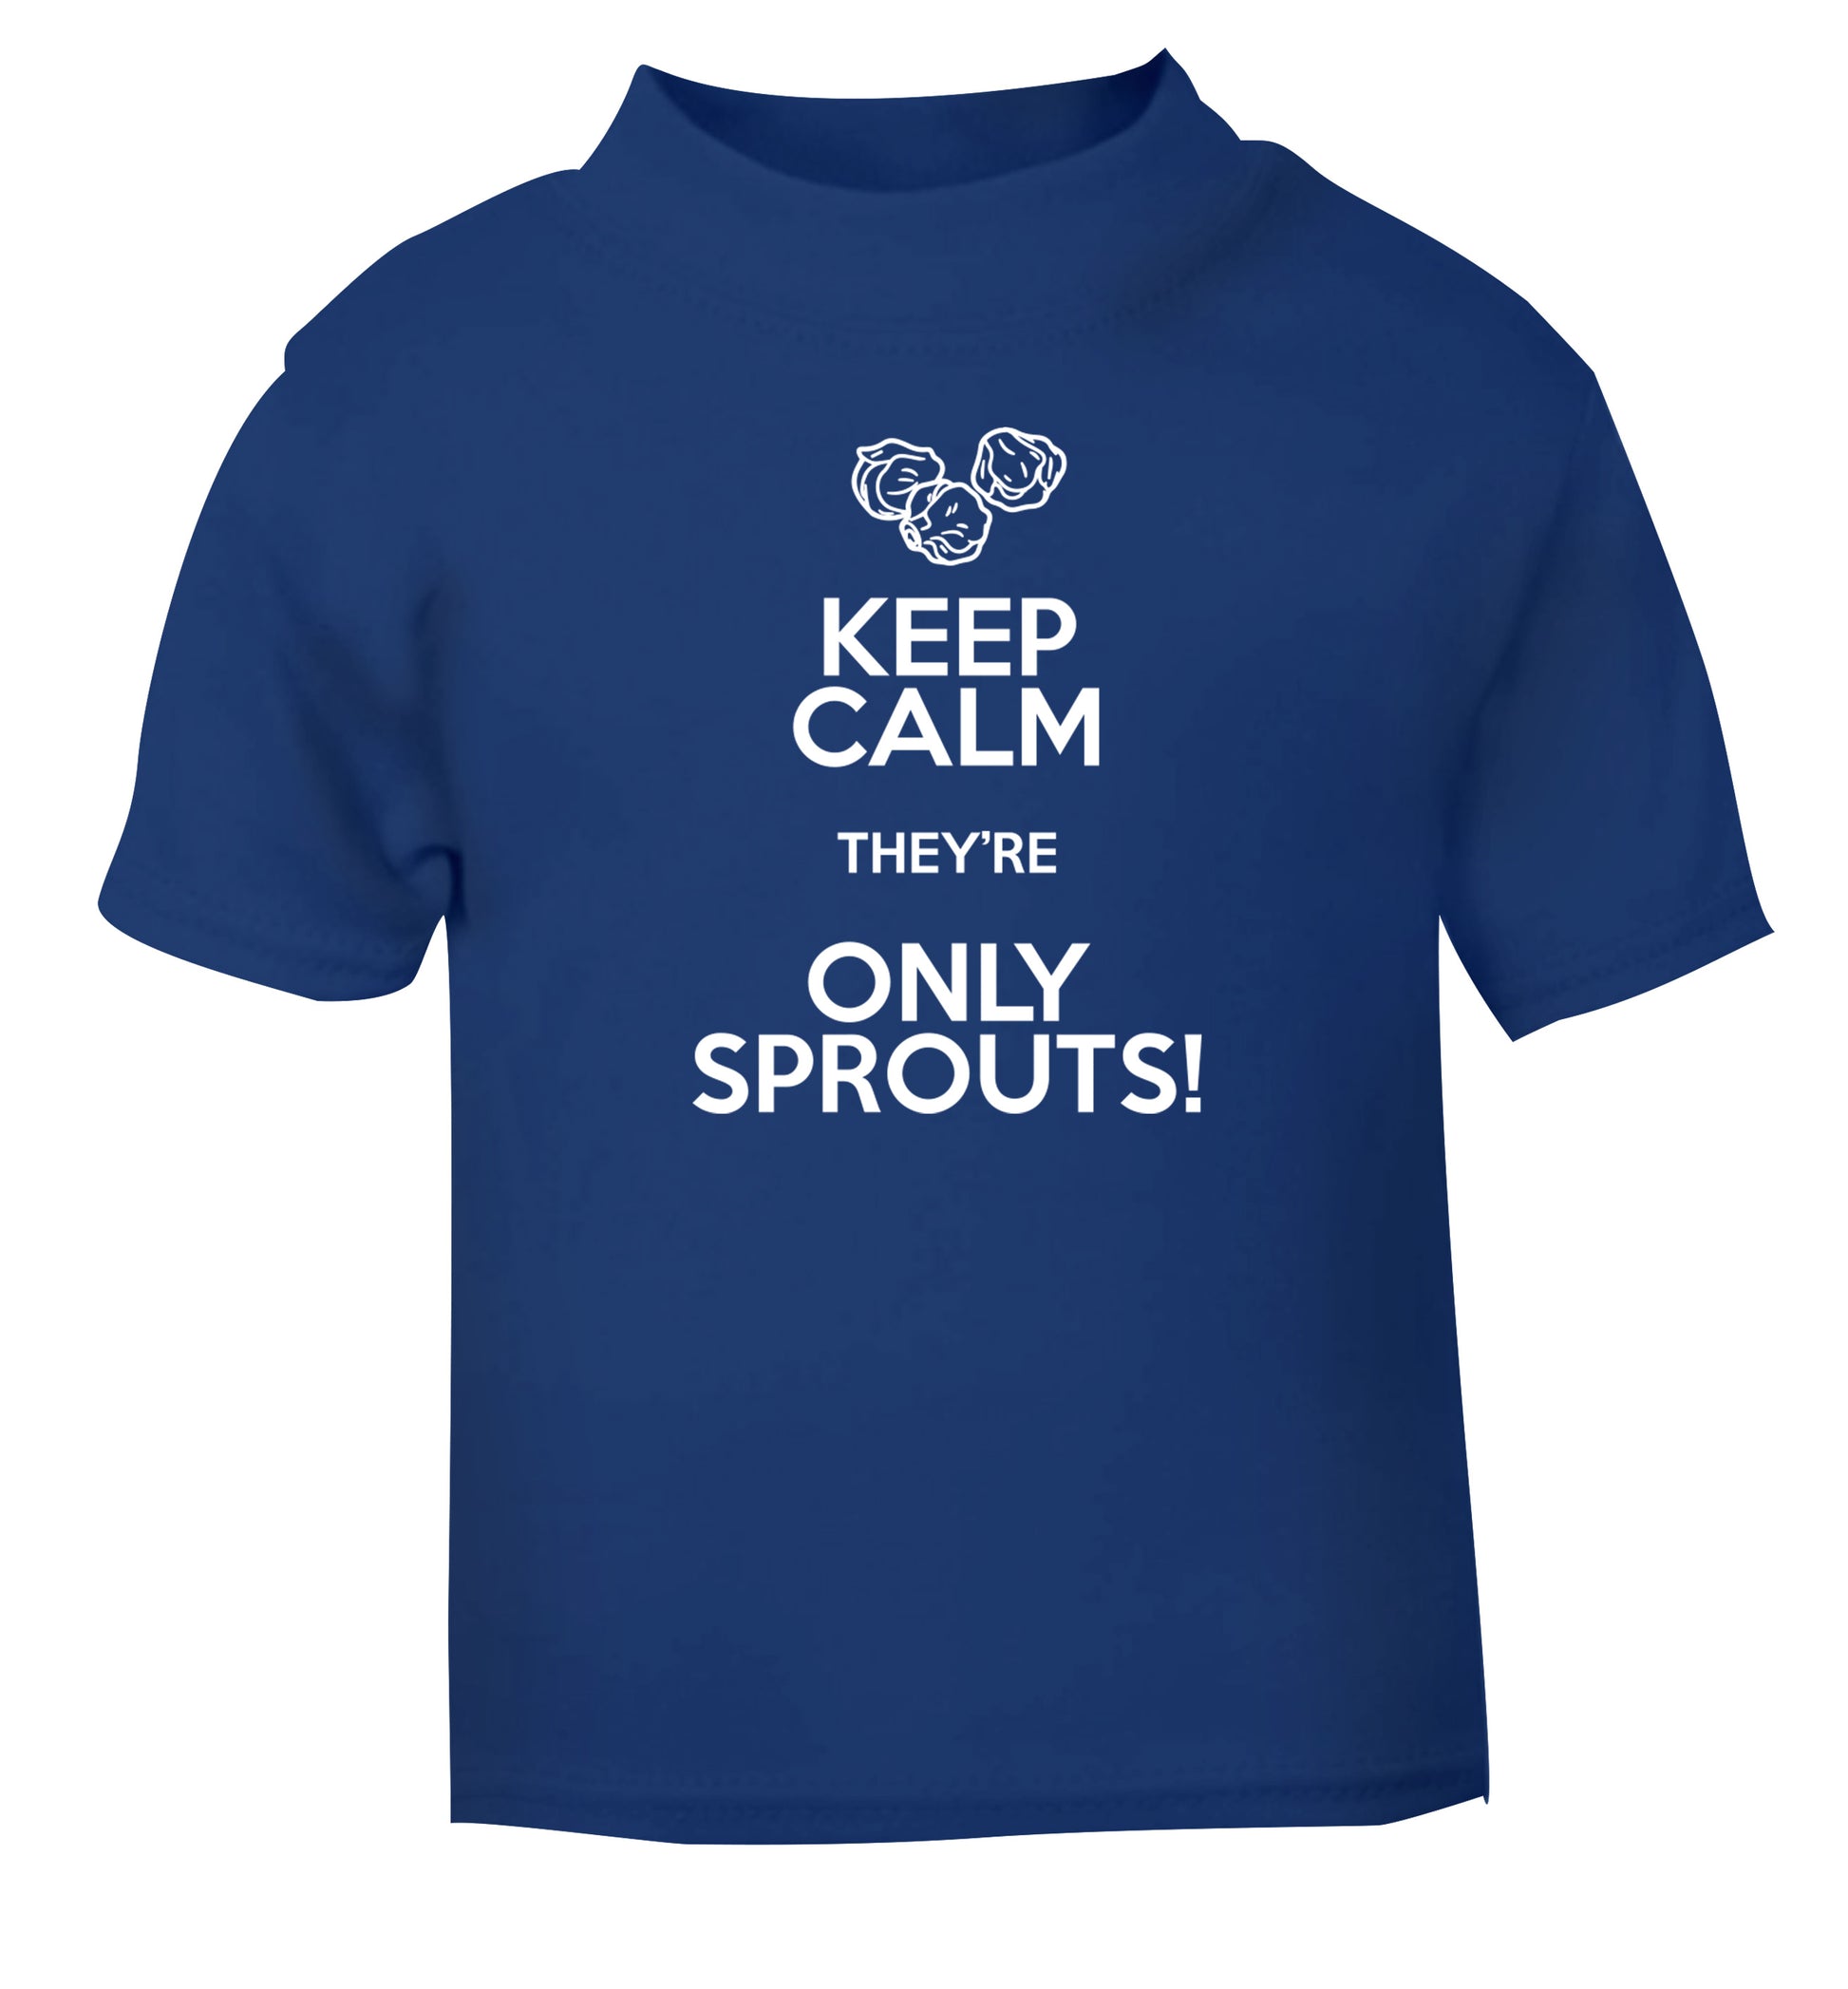 Keep calm they're only sprouts blue Baby Toddler Tshirt 2 Years